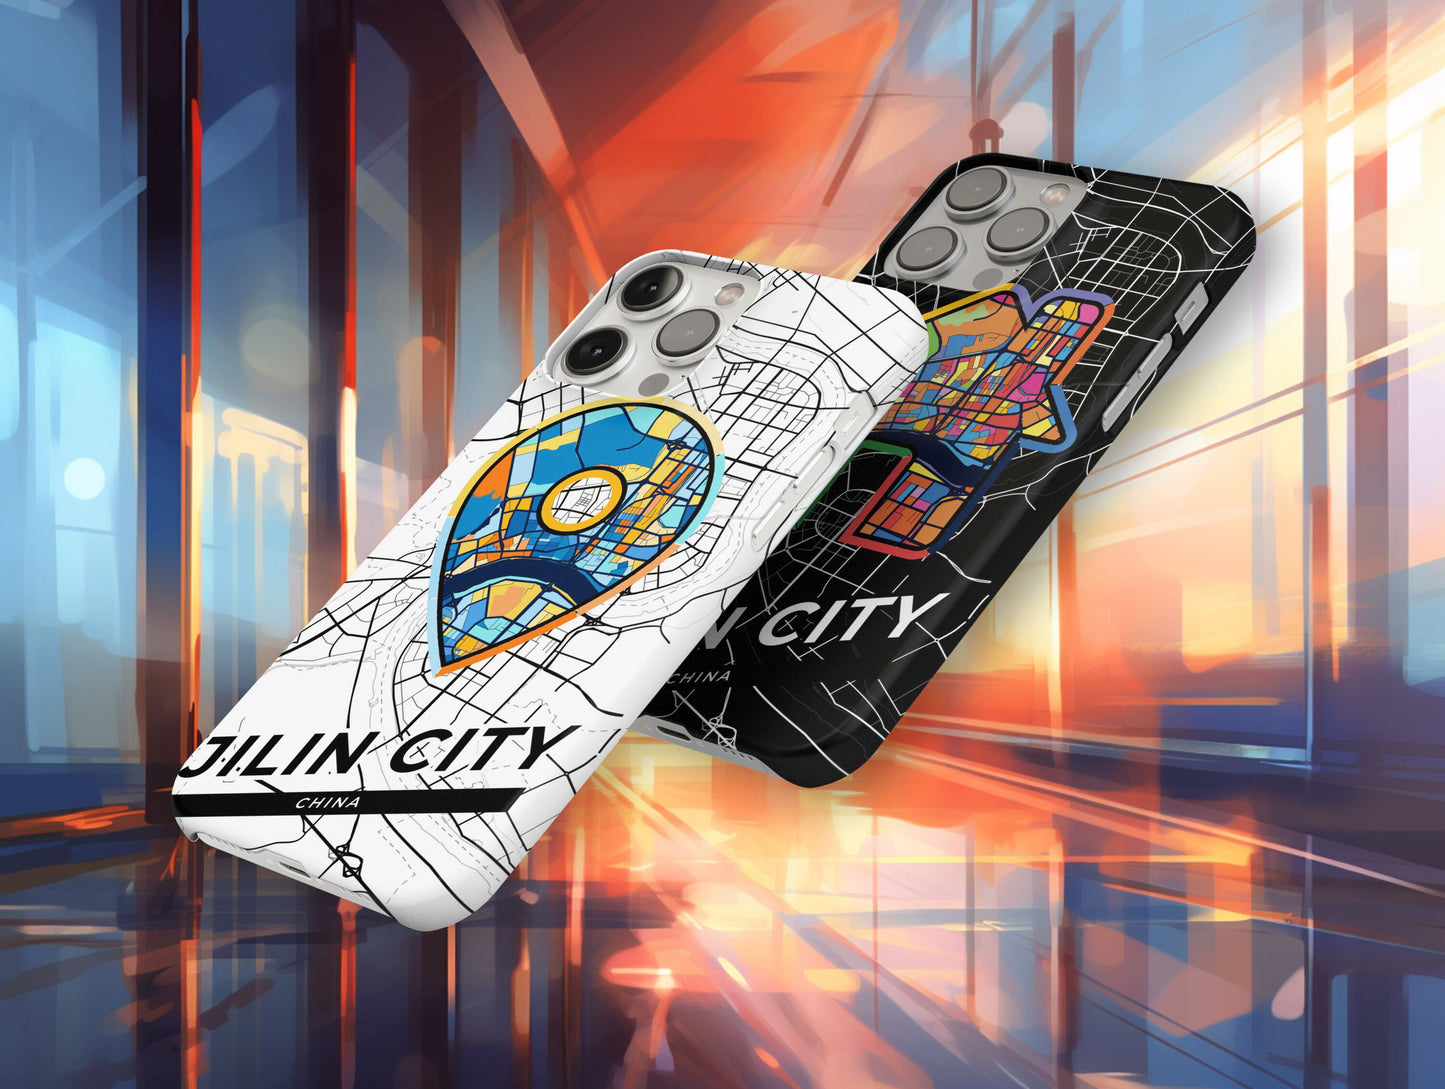 Jilin City China slim phone case with colorful icon. Birthday, wedding or housewarming gift. Couple match cases.